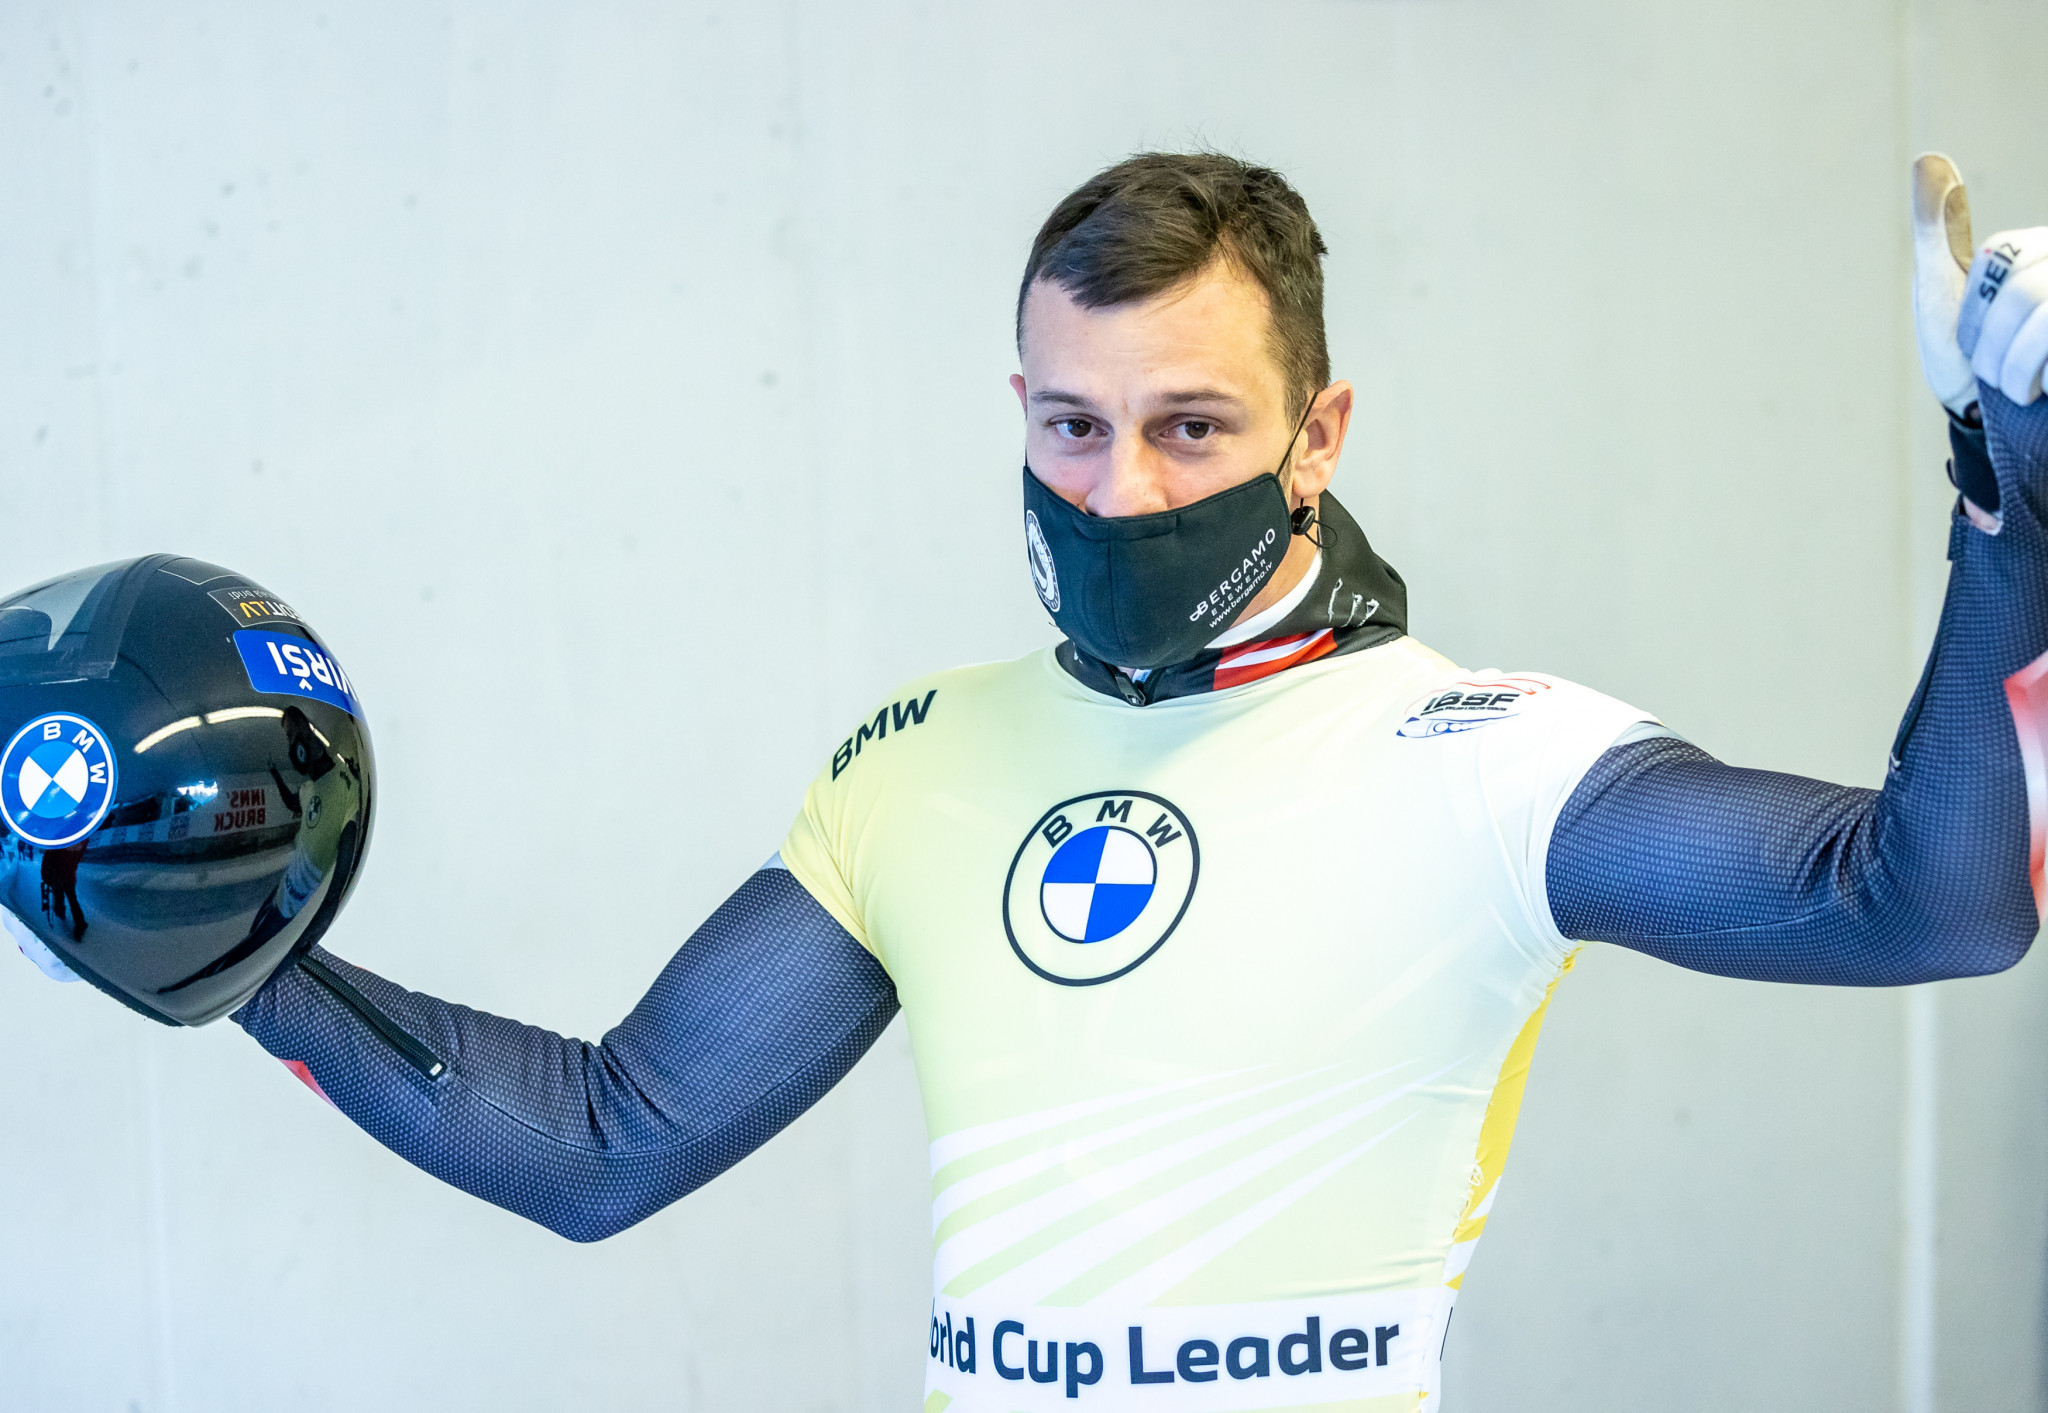 Martins Dukurs leads the men's skeleton World Cup standings ©Getty Images